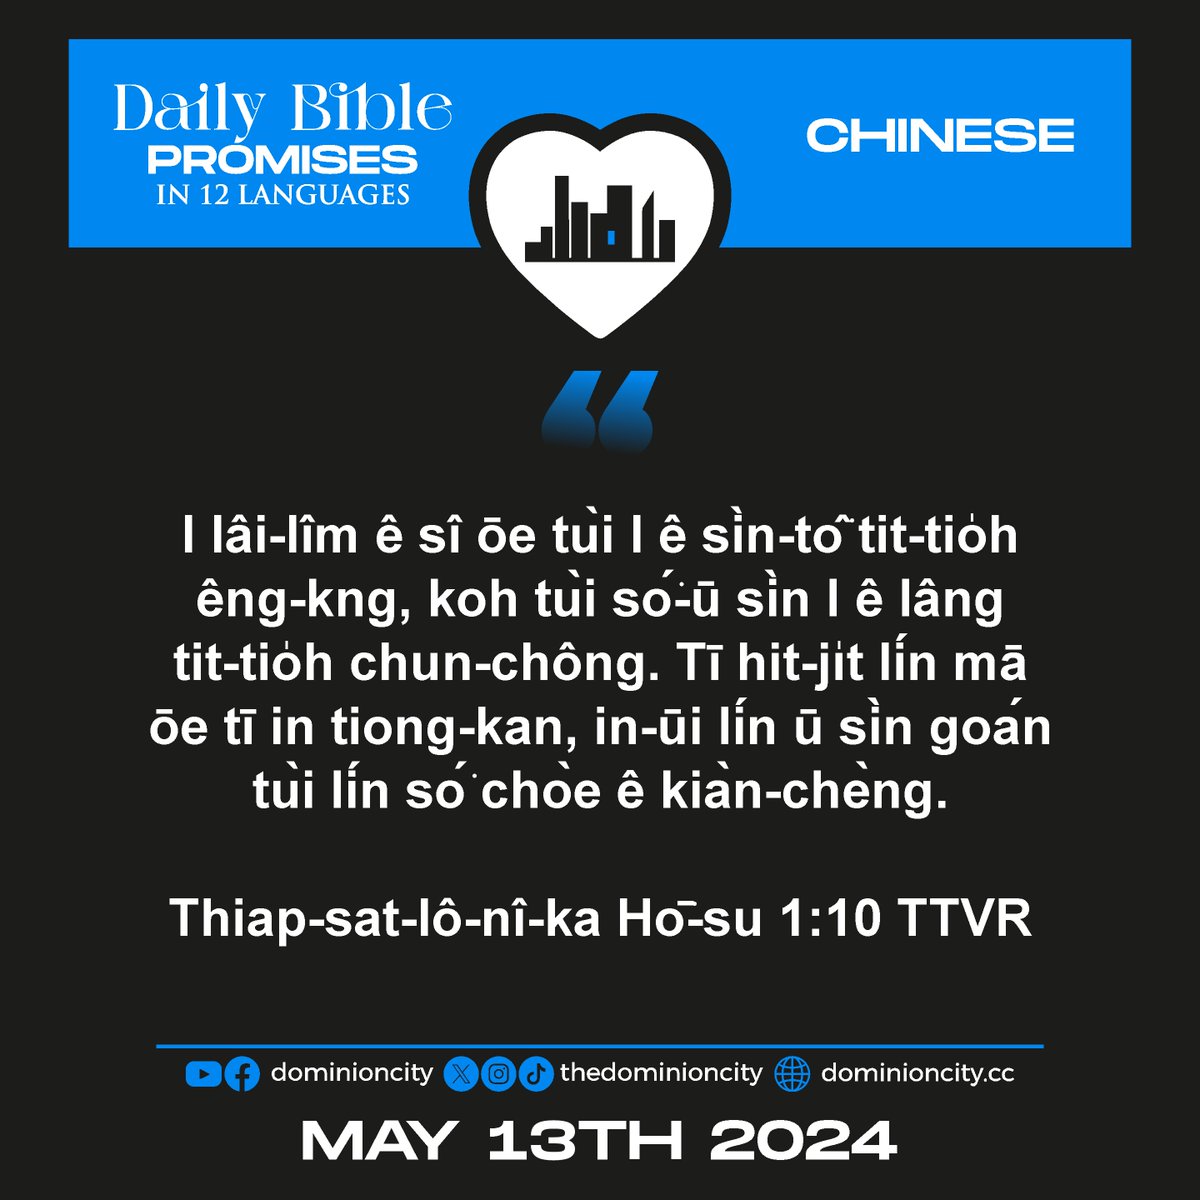 If you believe, type “AMEN”!

SET 1 of 3 | DAILY BIBLE PROMISES IN 12 LANGUAGES | MAY 13TH 2024 | LIKE, FOLLOW & SHARE

#Bible #GodsWord #trendingnow #Biblepromises #trendingreels #hope #love #faith #GoodNews #NewsUpdate